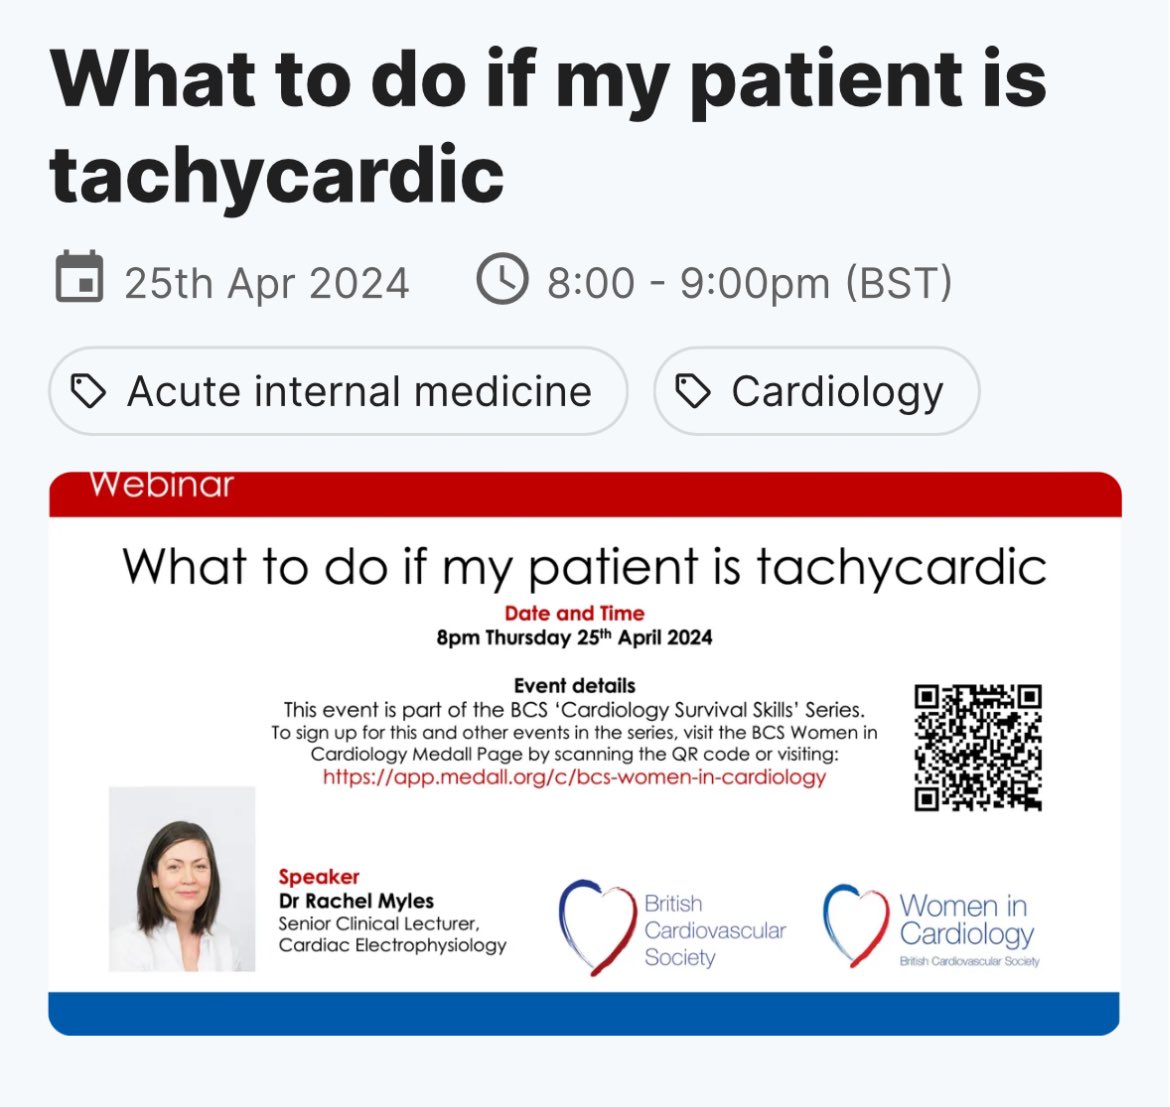 Are you registered for the next Cardiology Survival Skills webinar? app.medall.org/c/bcs-women-in… Feedback about our fabulous speaker, Dr Jenny Rayner: “Best ECG teaching ever” “She demystified ECG reading” “Dynamic, interactive, engaging” “Excellent insight into cardiology career”